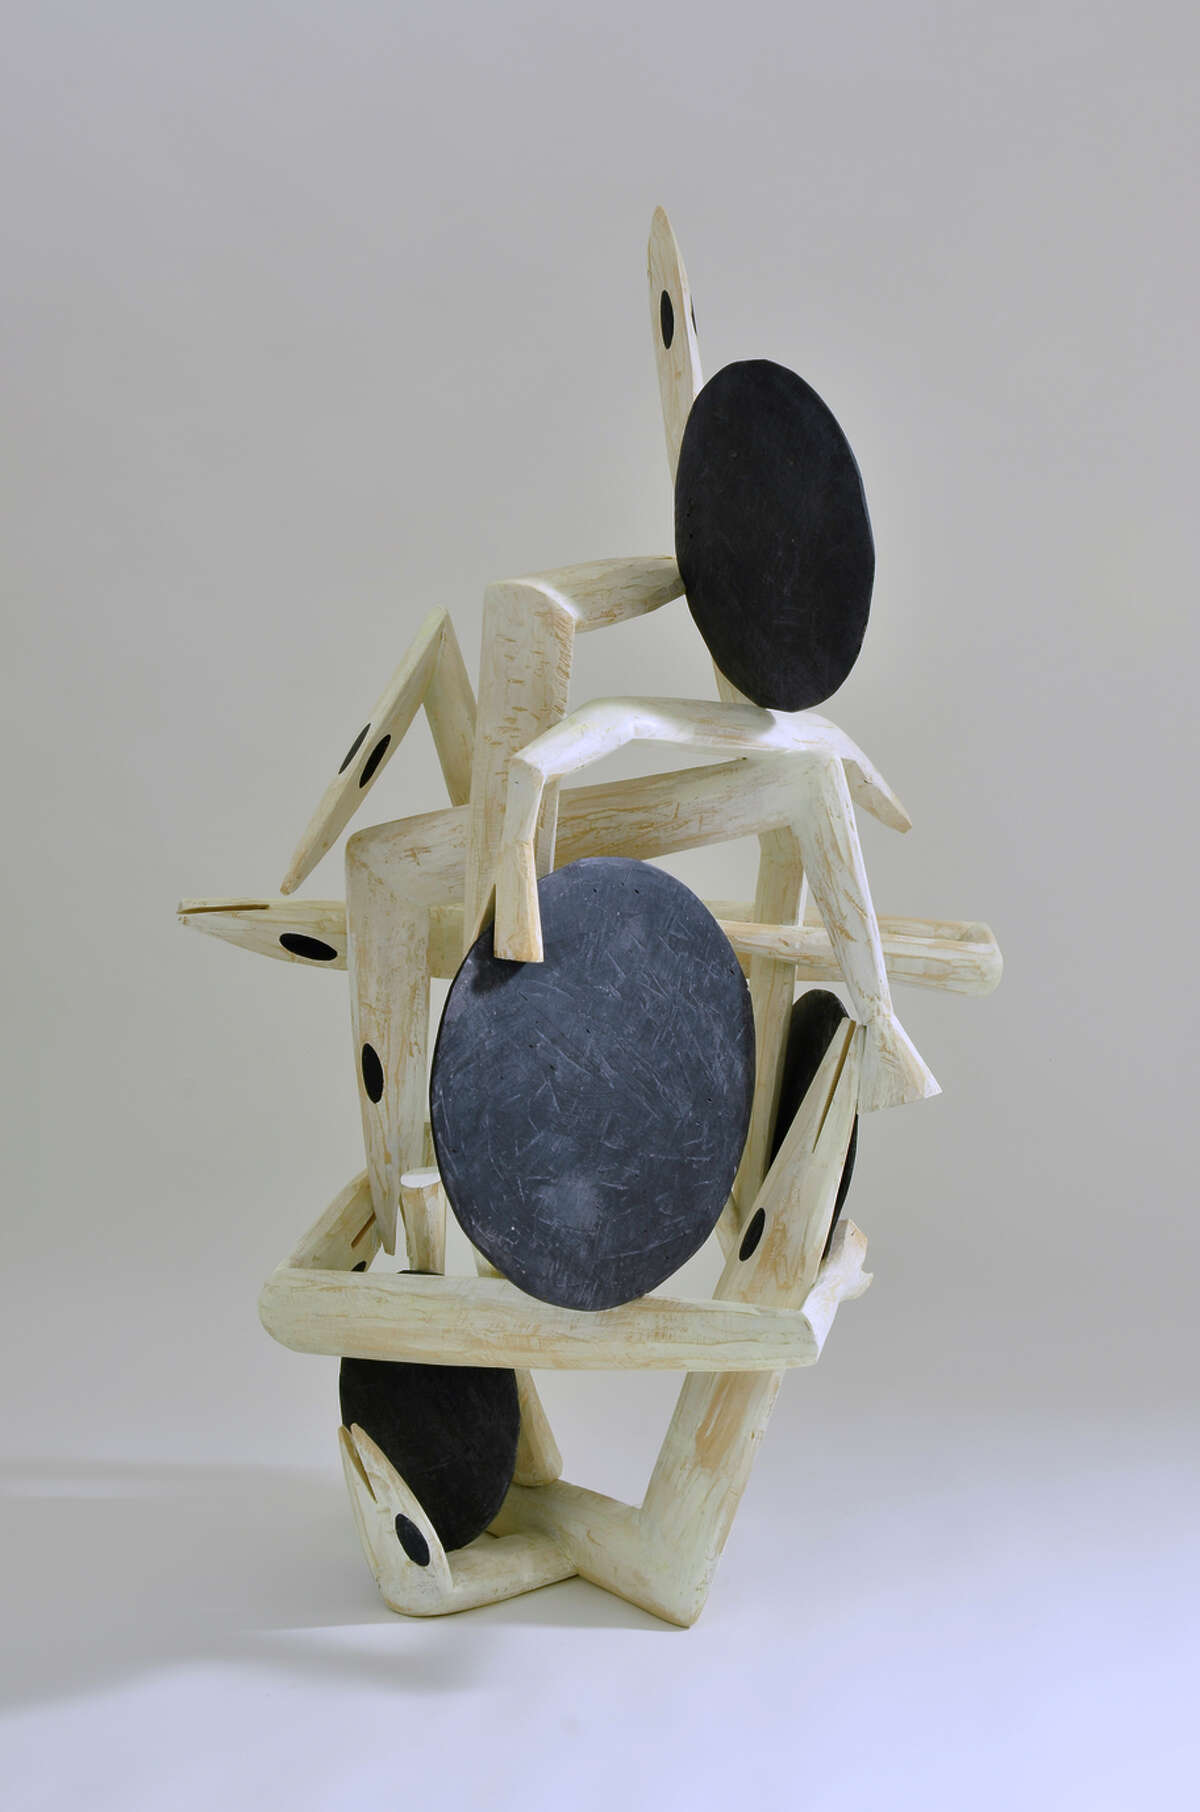 “Bode” (2015), wood and paint by Robert Brady, is on display at Jack Fischer Gallery.